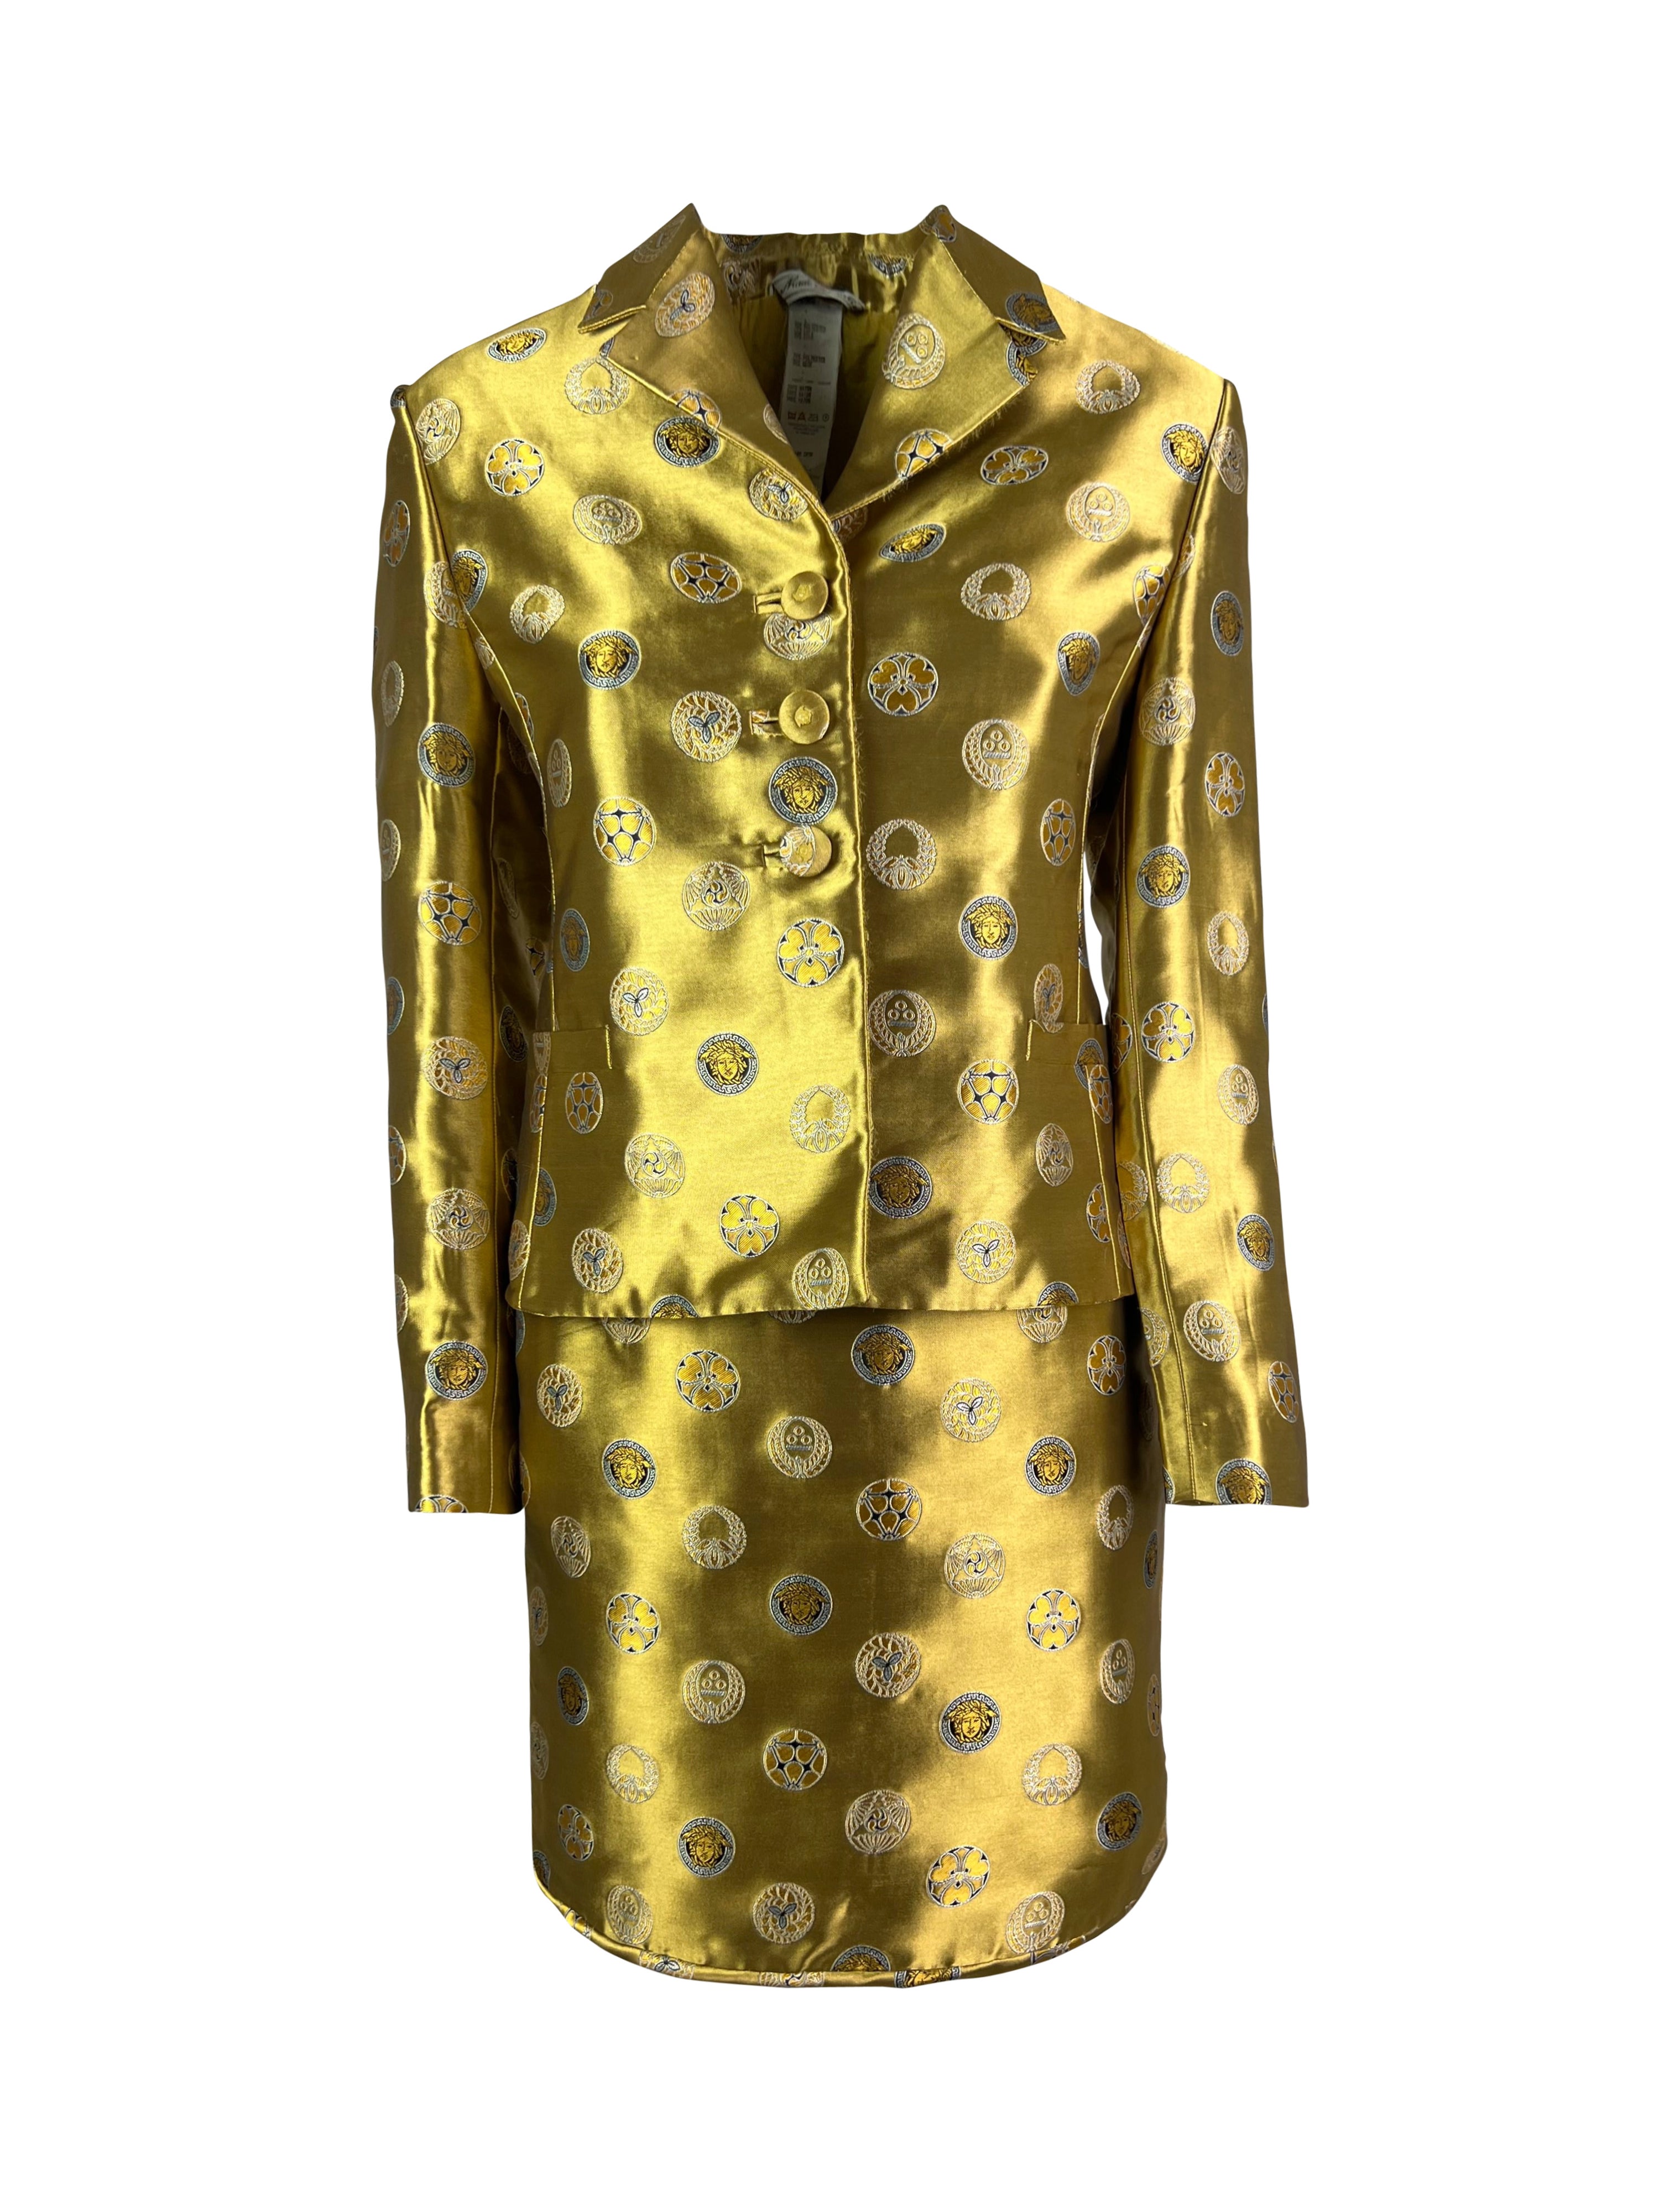 Gianni Versace Fall 1997 Golden Coin Print Suit